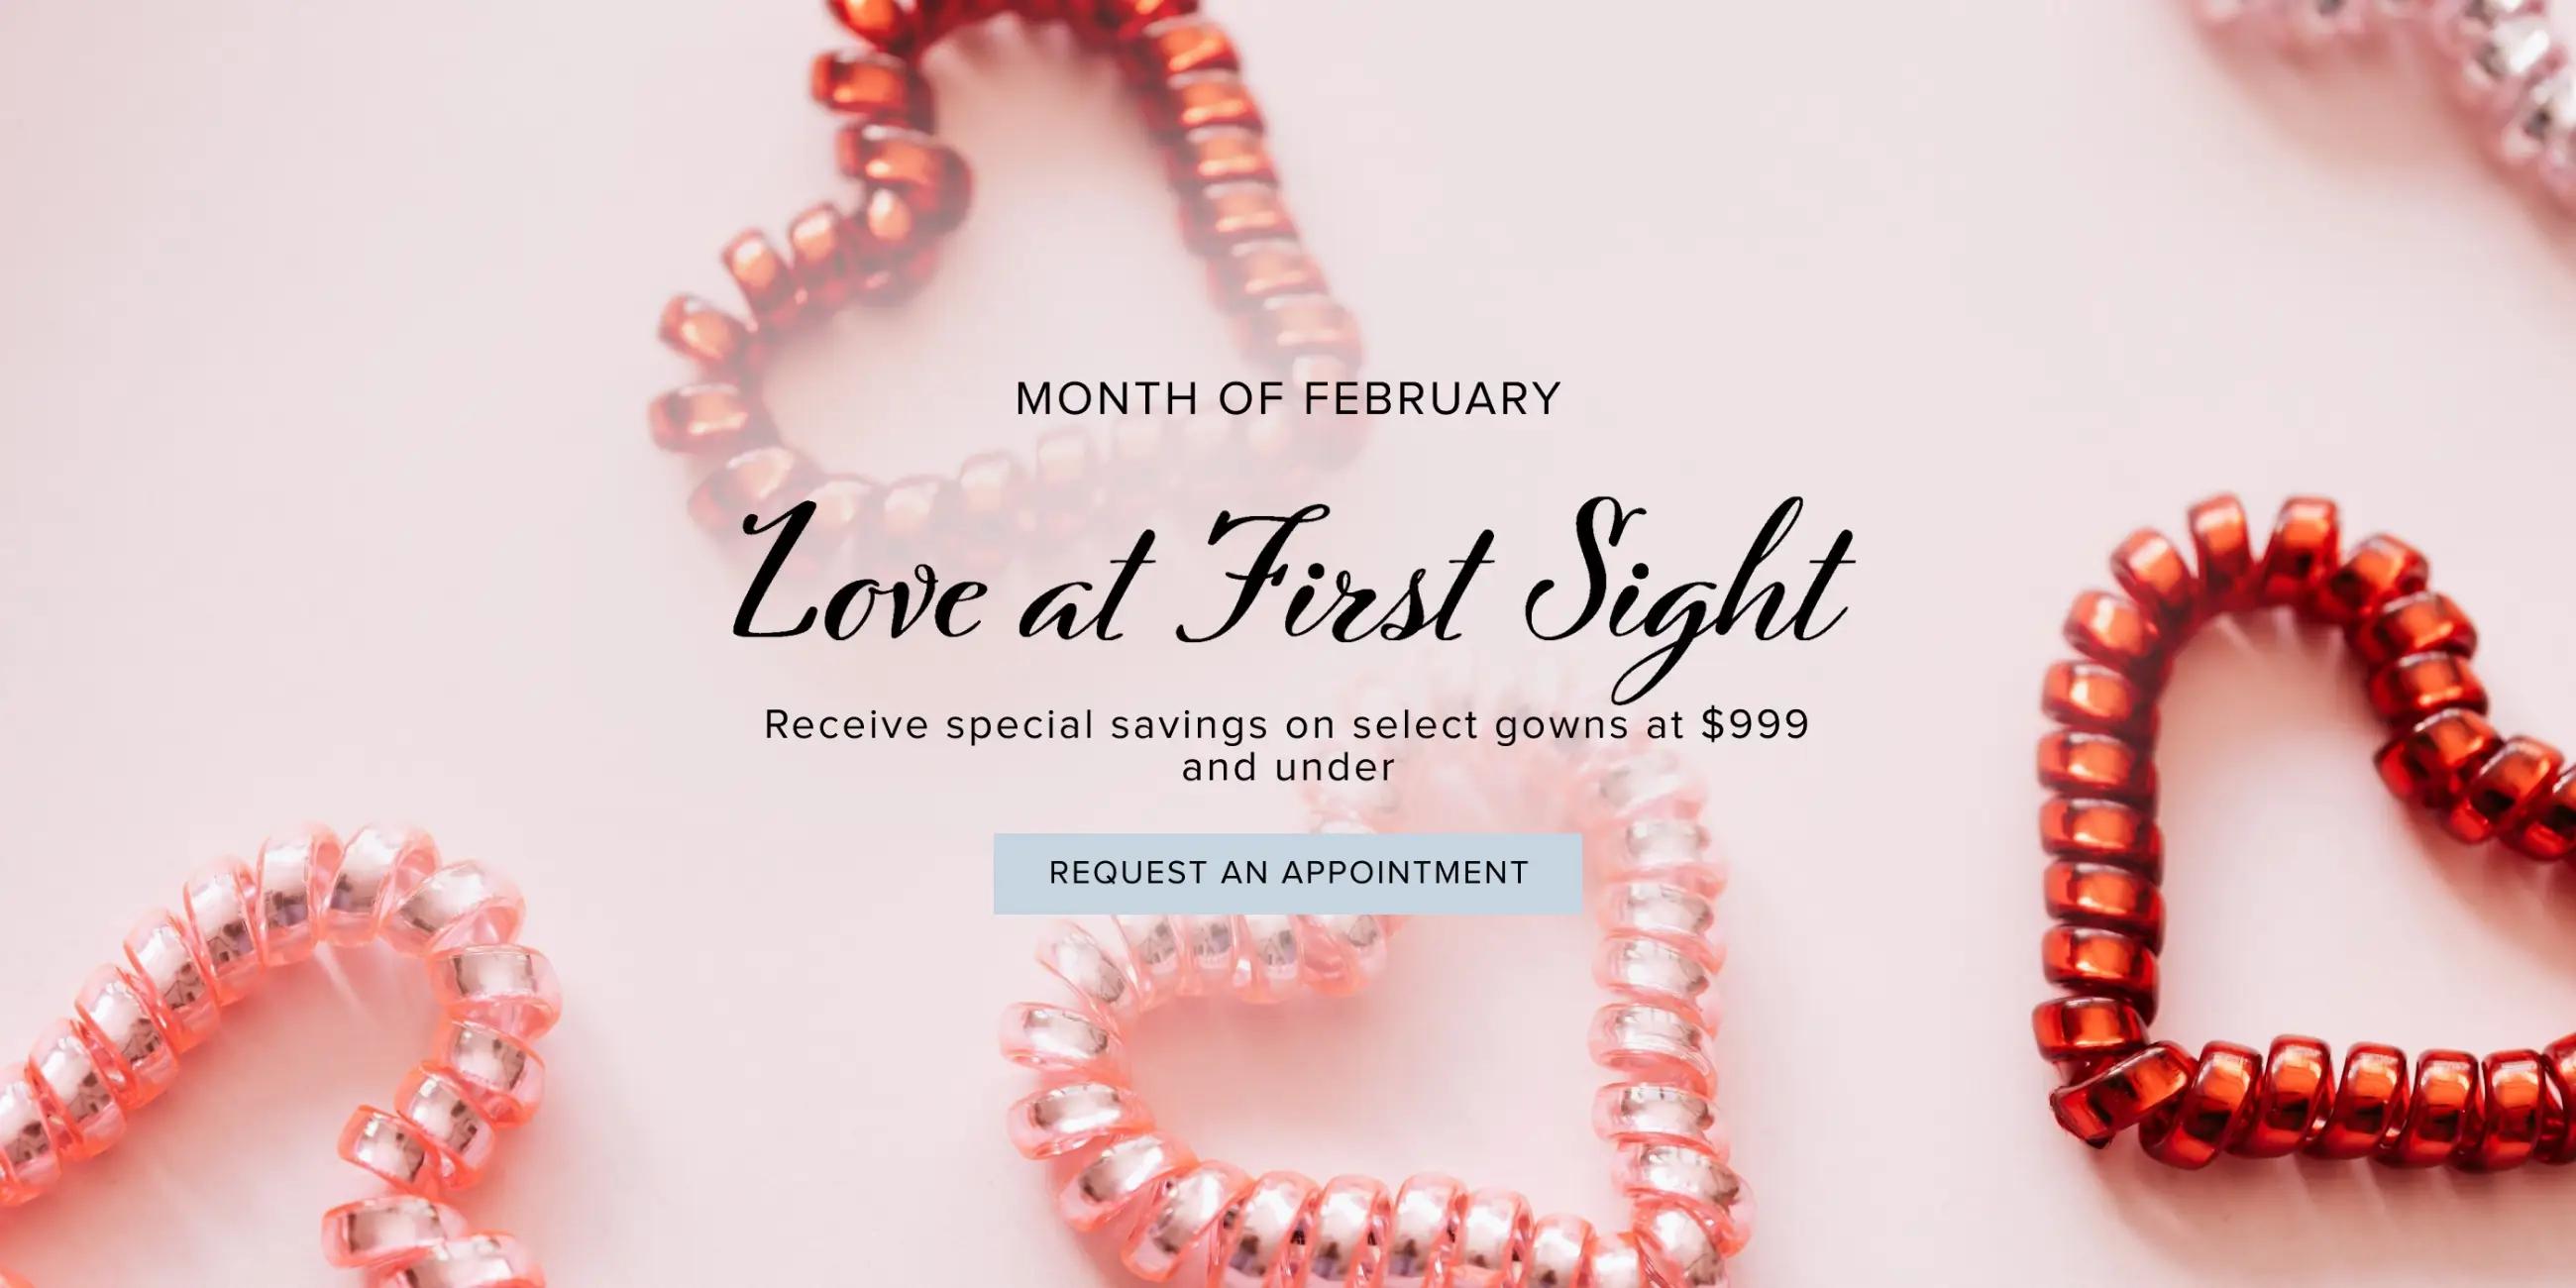 Love at First Sight event at After 5 and Weddings